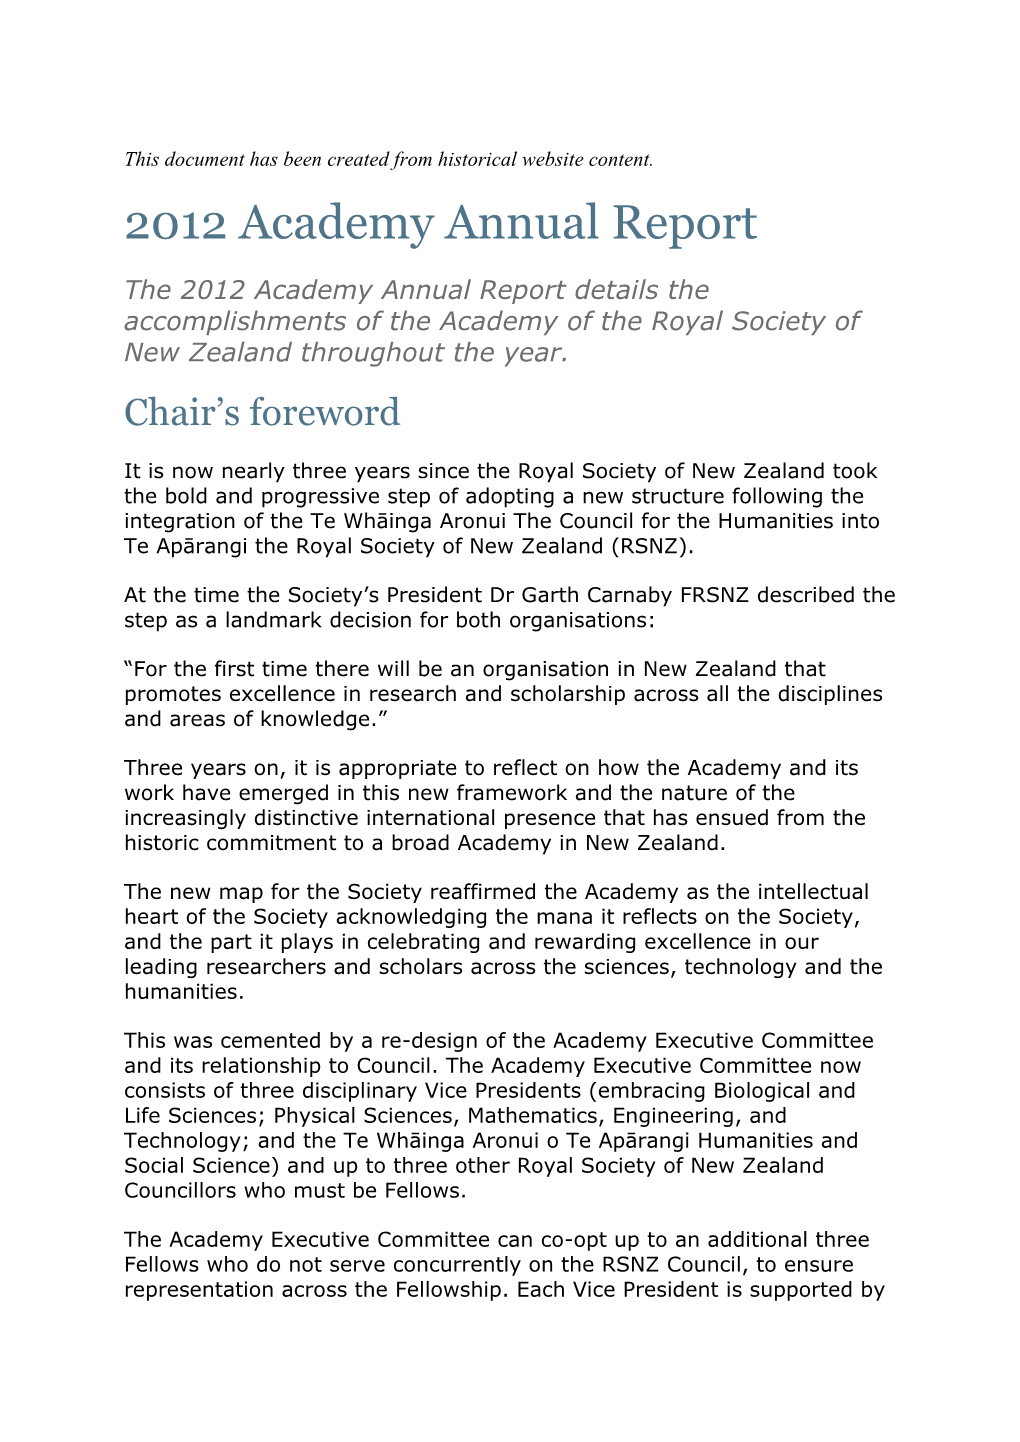 2012 Academy Annual Report